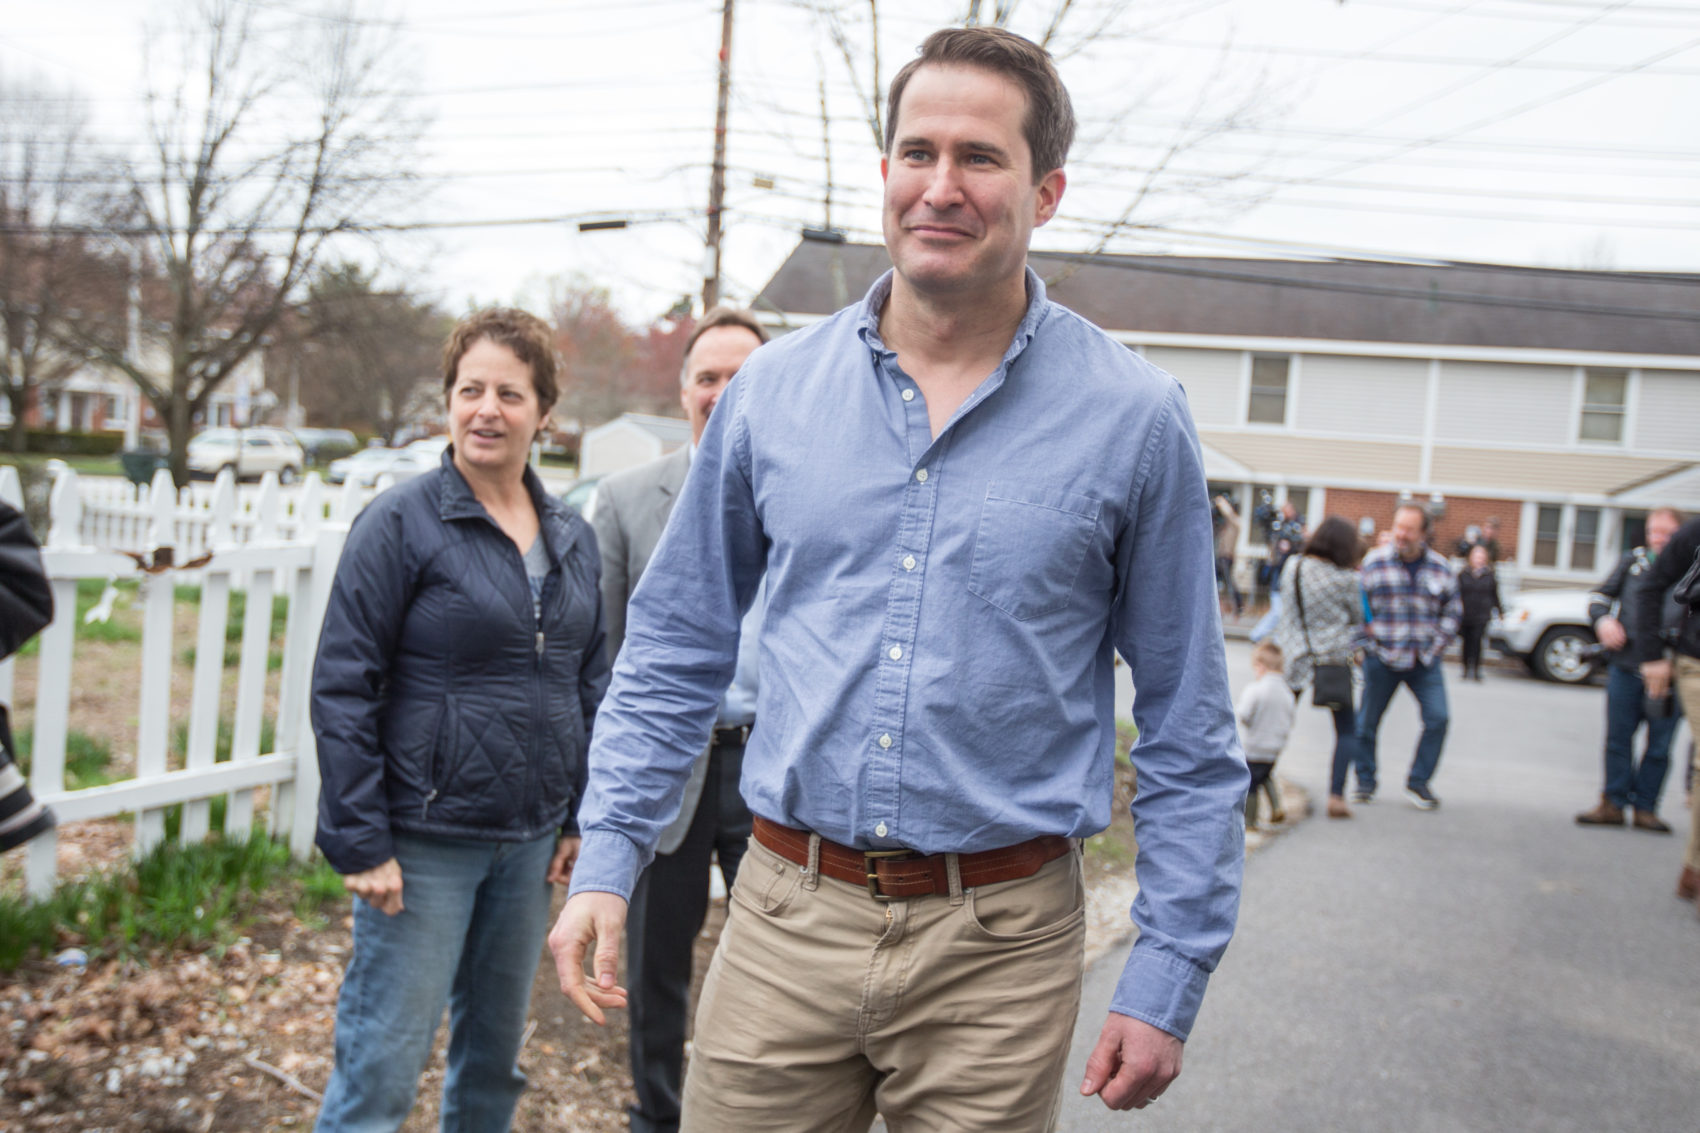  Rep. Seth Moulton (D-Mass.) arrives for a community project and presidential campaign stop in Manchester, N.H. in July. (Scott Eisen/Getty Images)